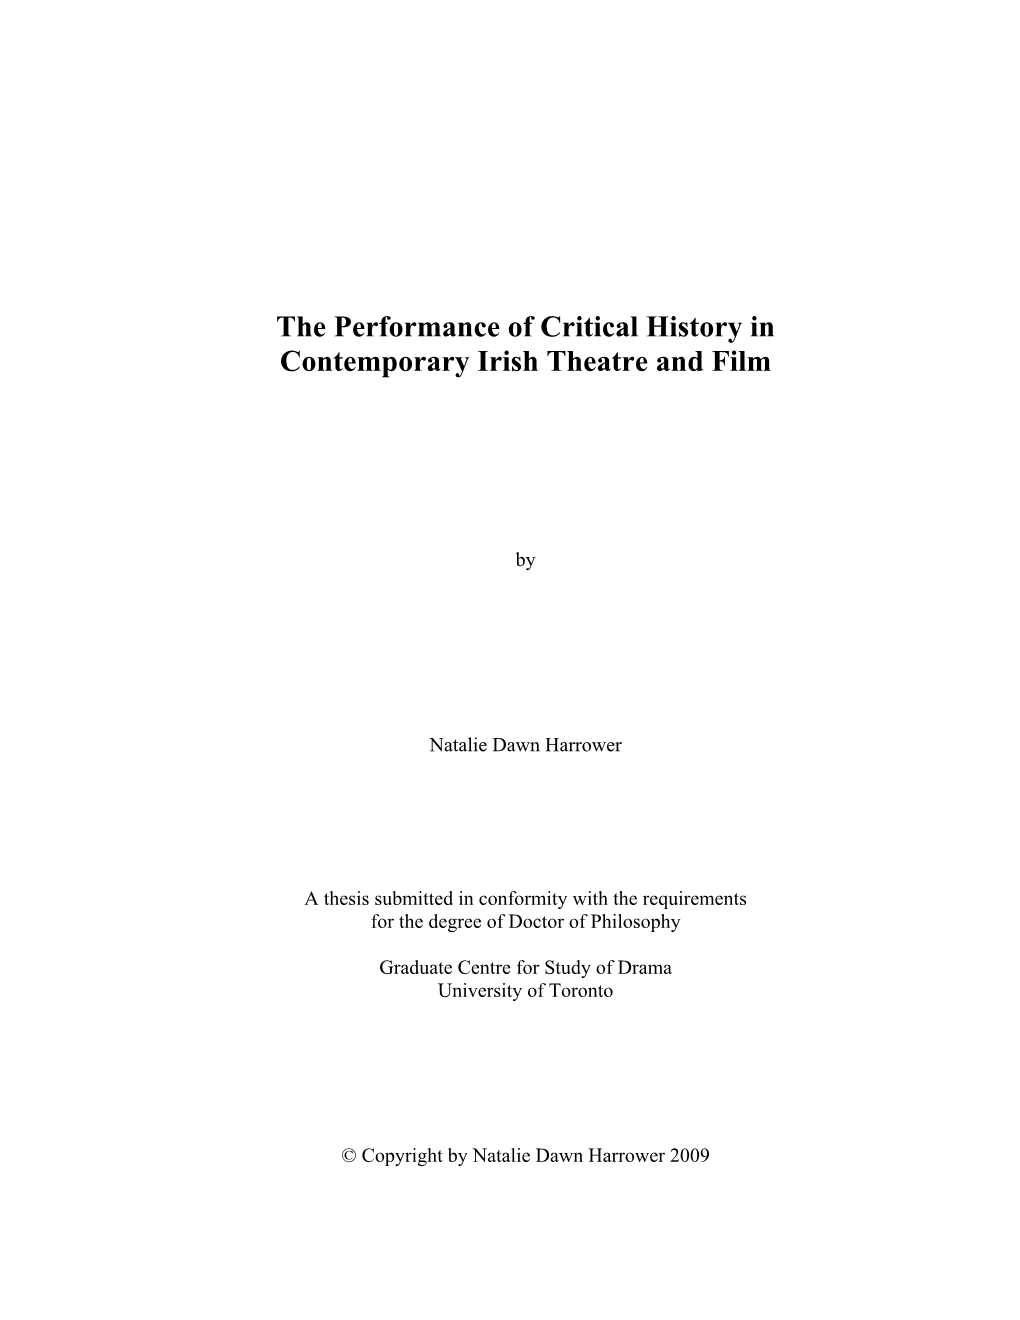 The Performance of Critical History in Contemporary Irish Theatre and Film